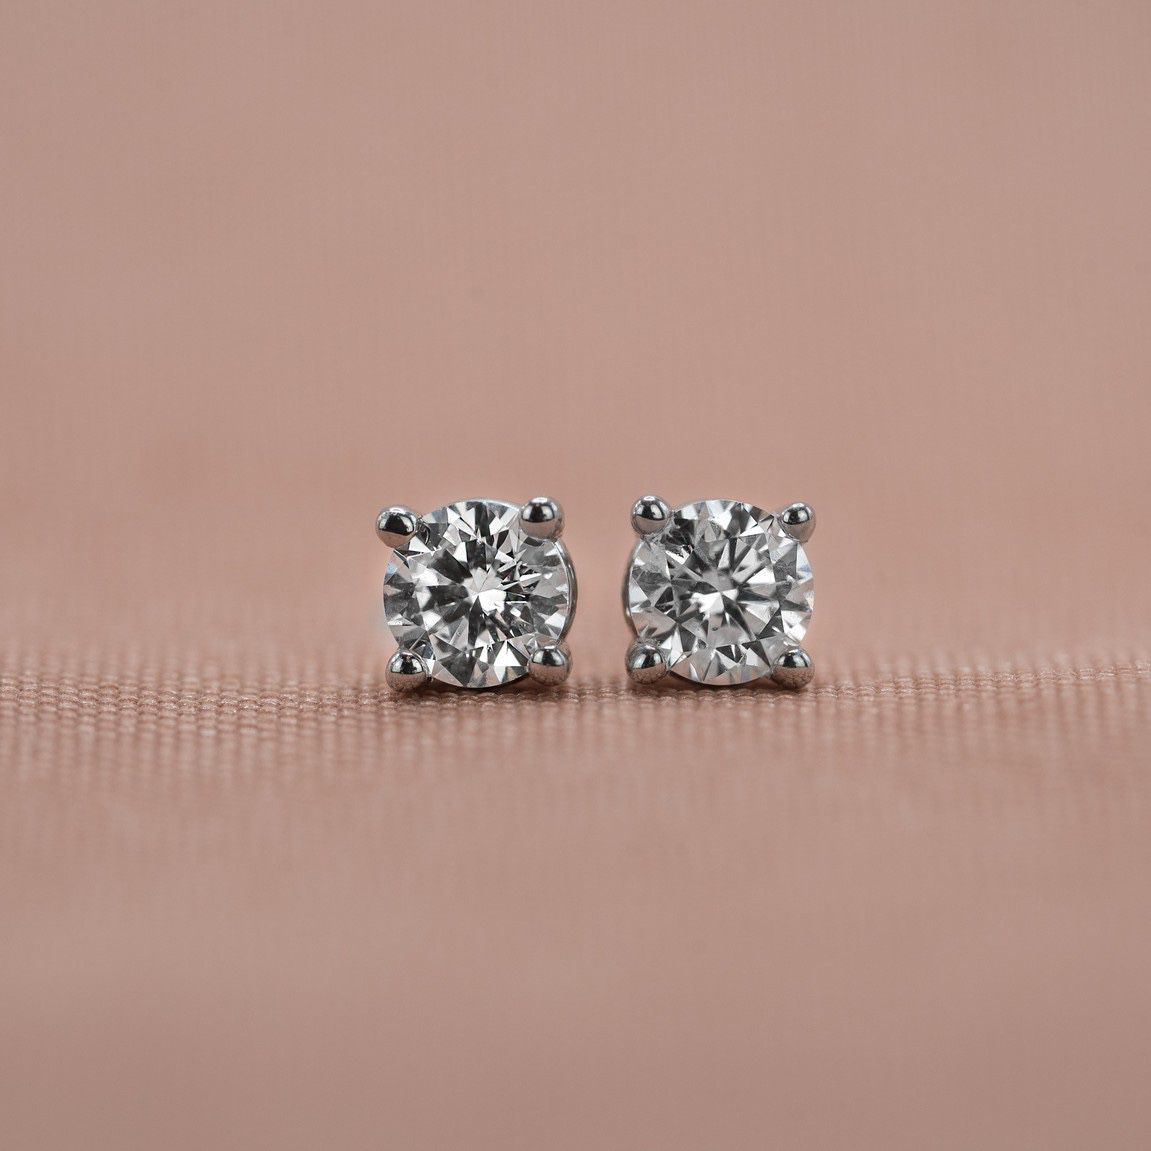 *MUST READ DESCRIPTION BEFORE MESSAGING ME* 14kt Yellow Or White Gold Diamond Studs